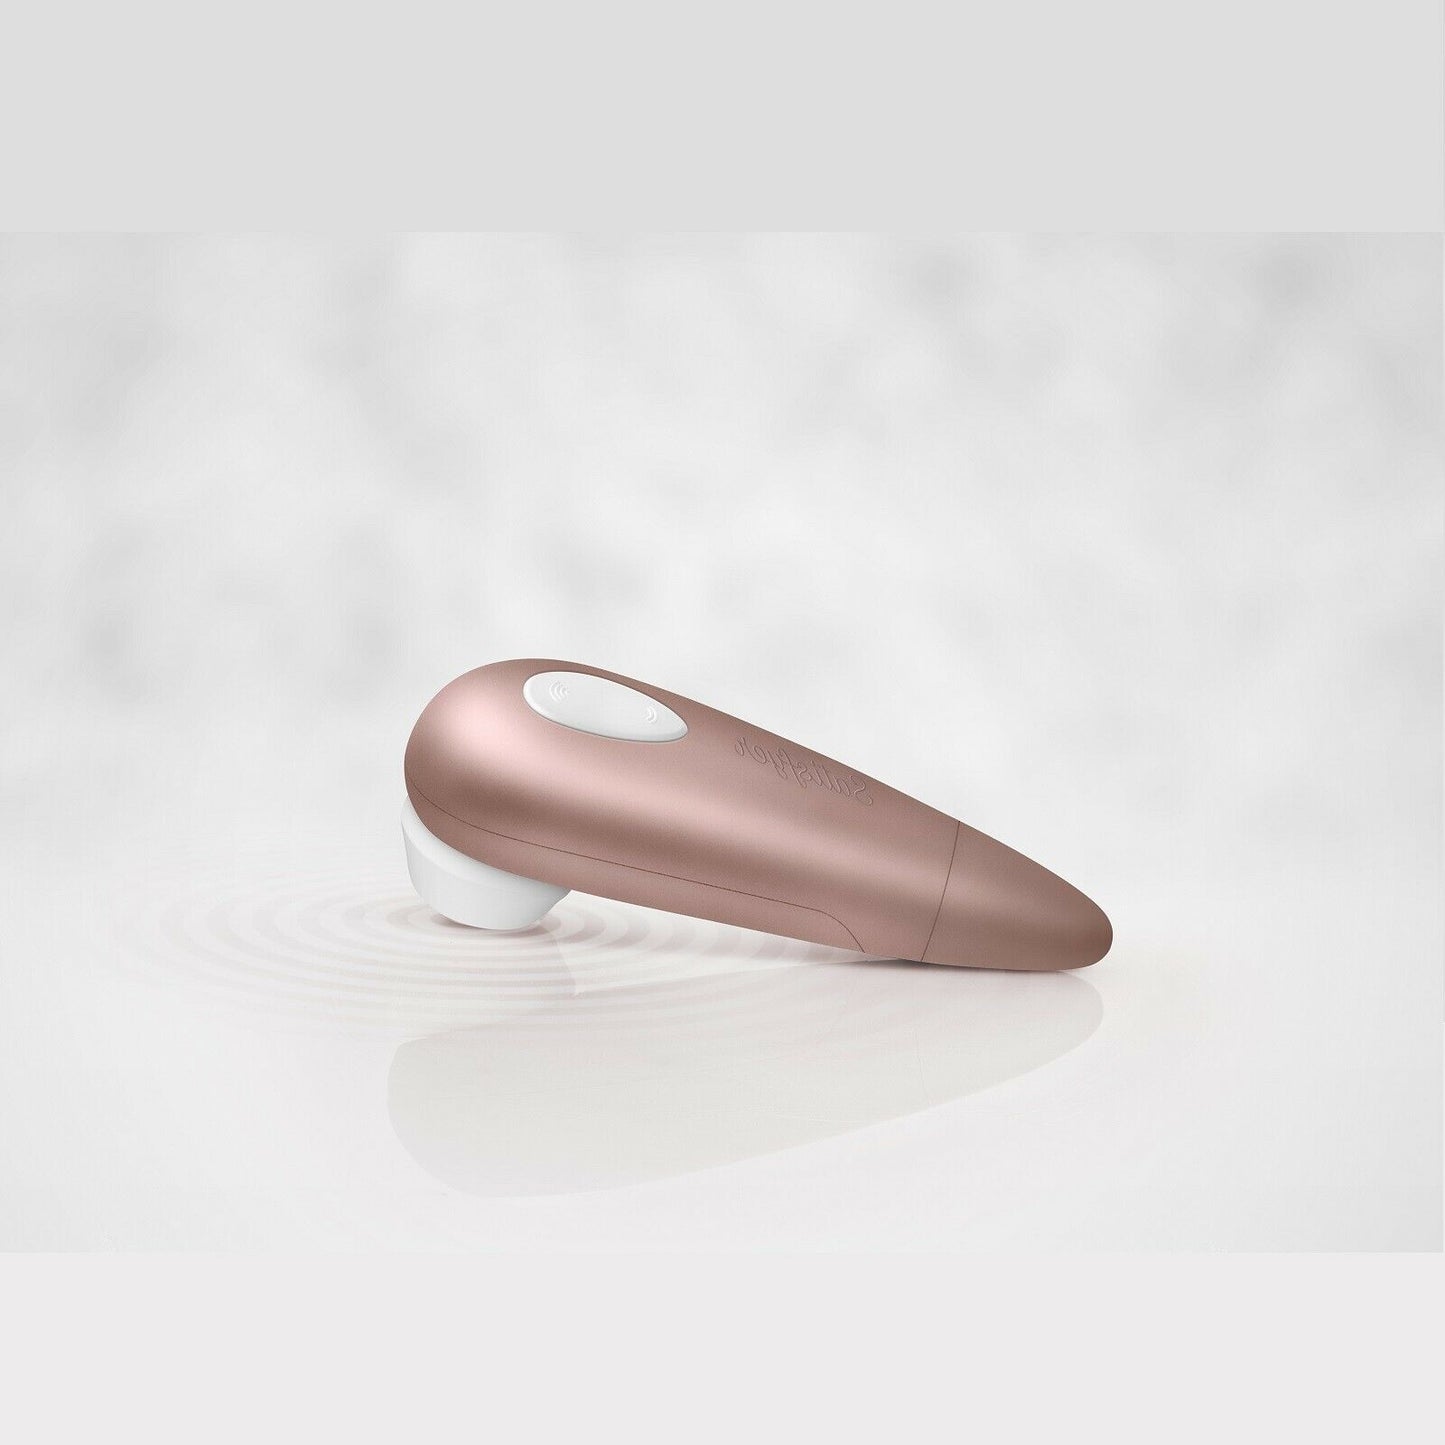 Satisfyer 1 Air Waves Clitoral Stimulator Air Suction Vibrator Clit Sex Toy NEW